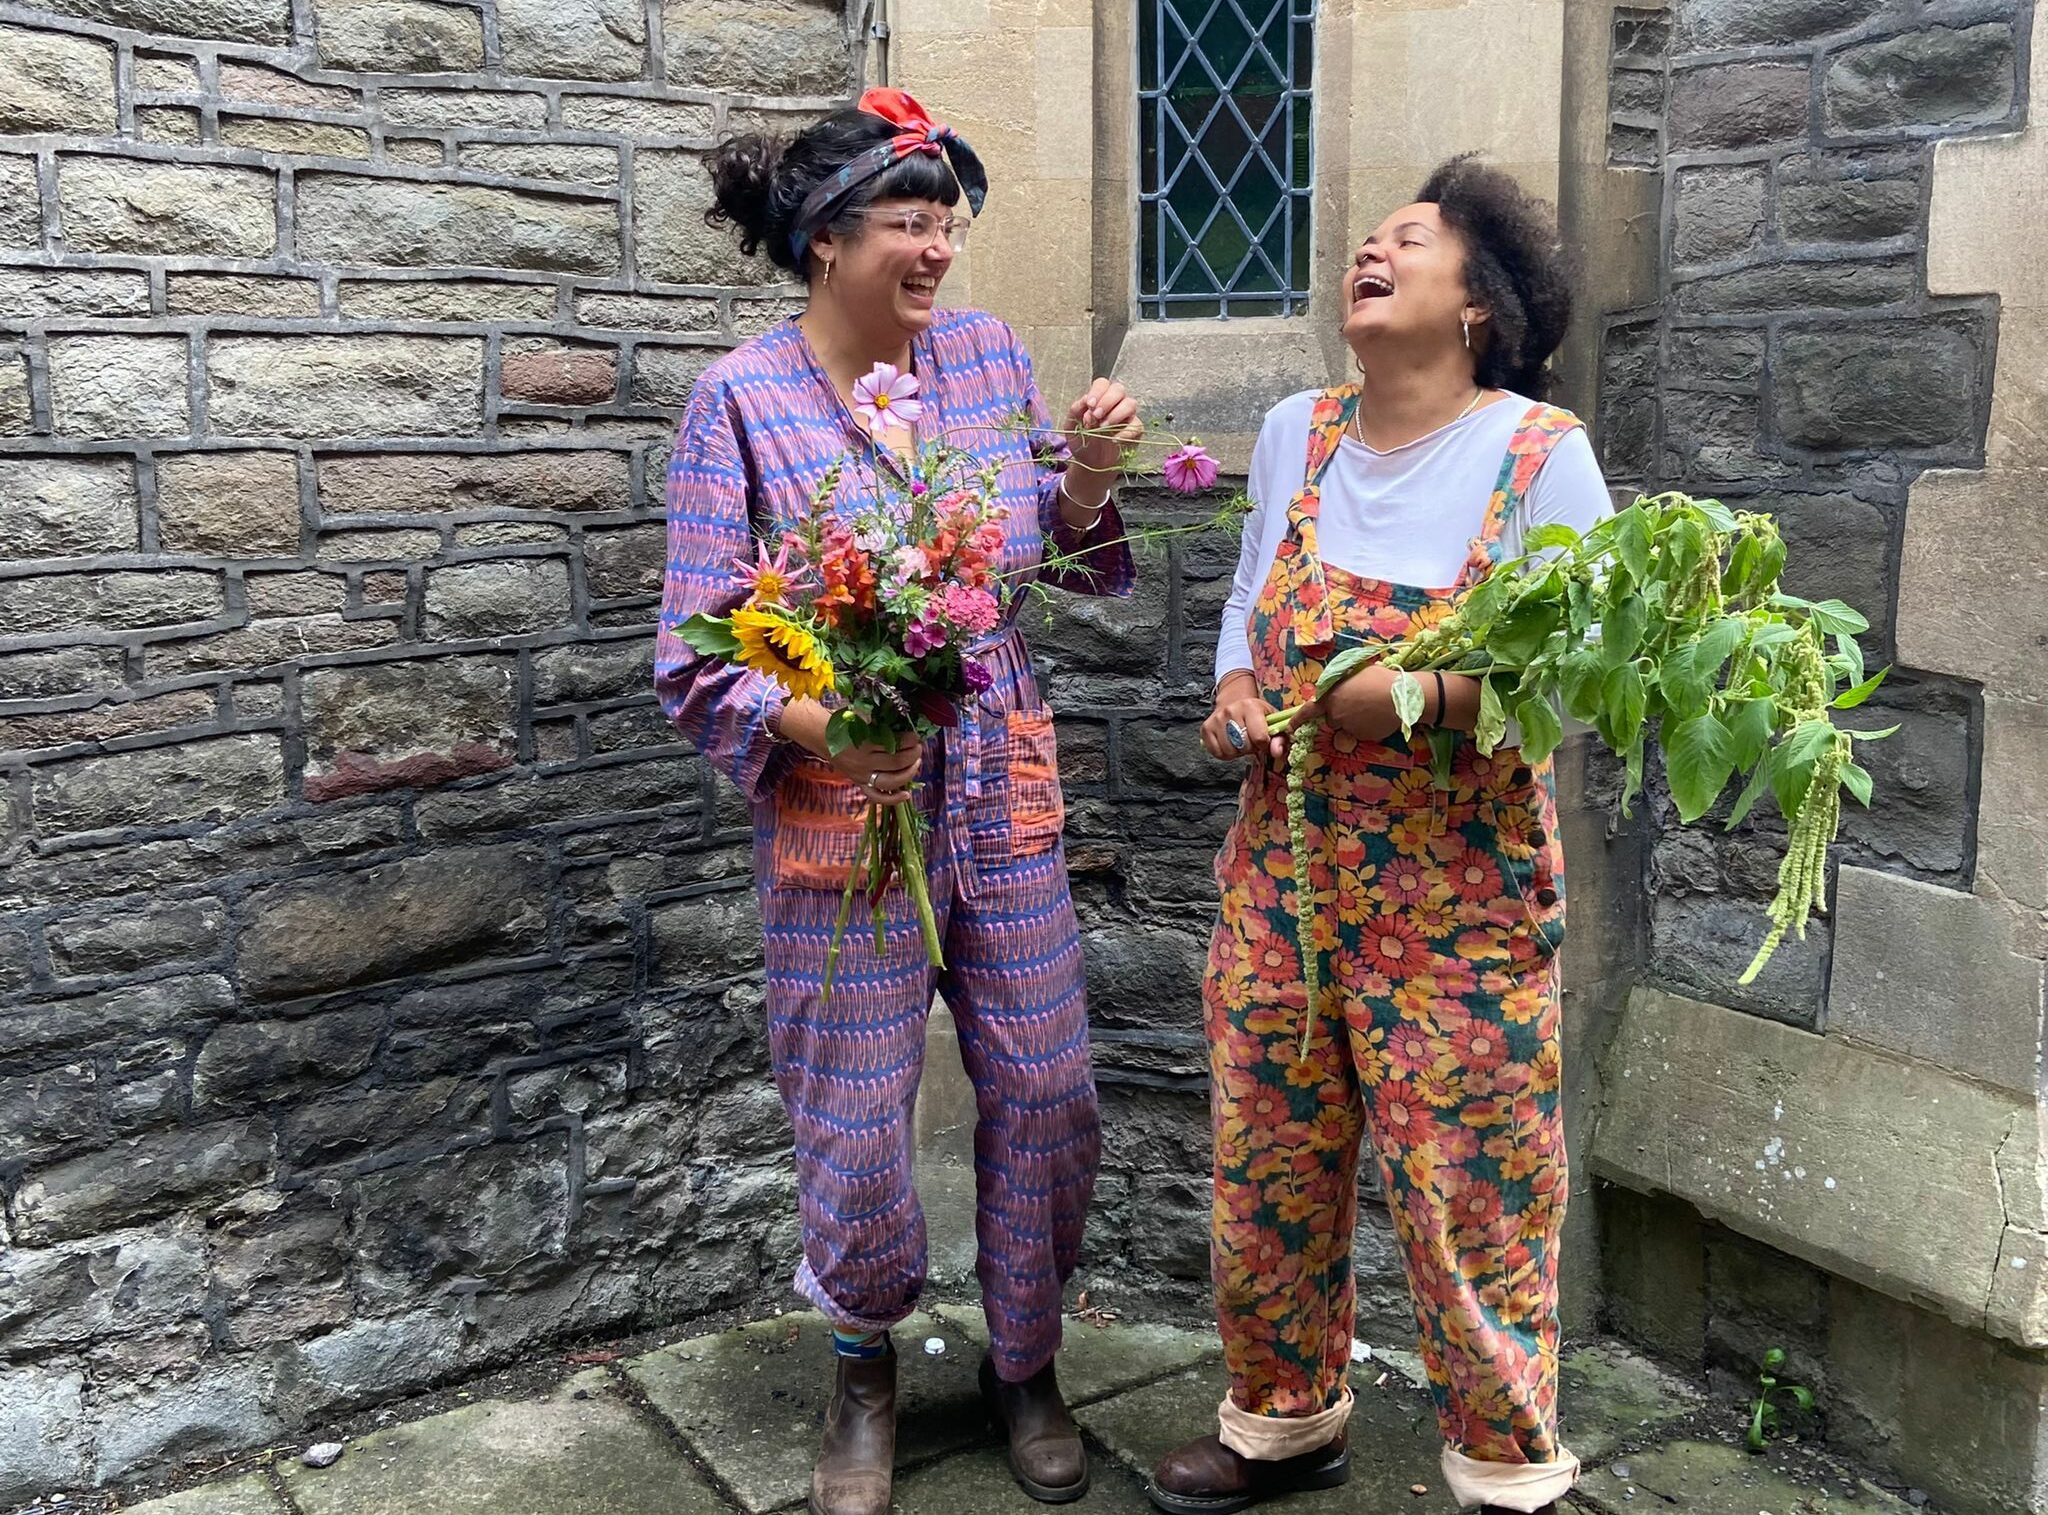 Sarah Barnes and Elsie Harp share a joke in this promotional shot for their collaboration with the We Are Bread and Roses refugee programme